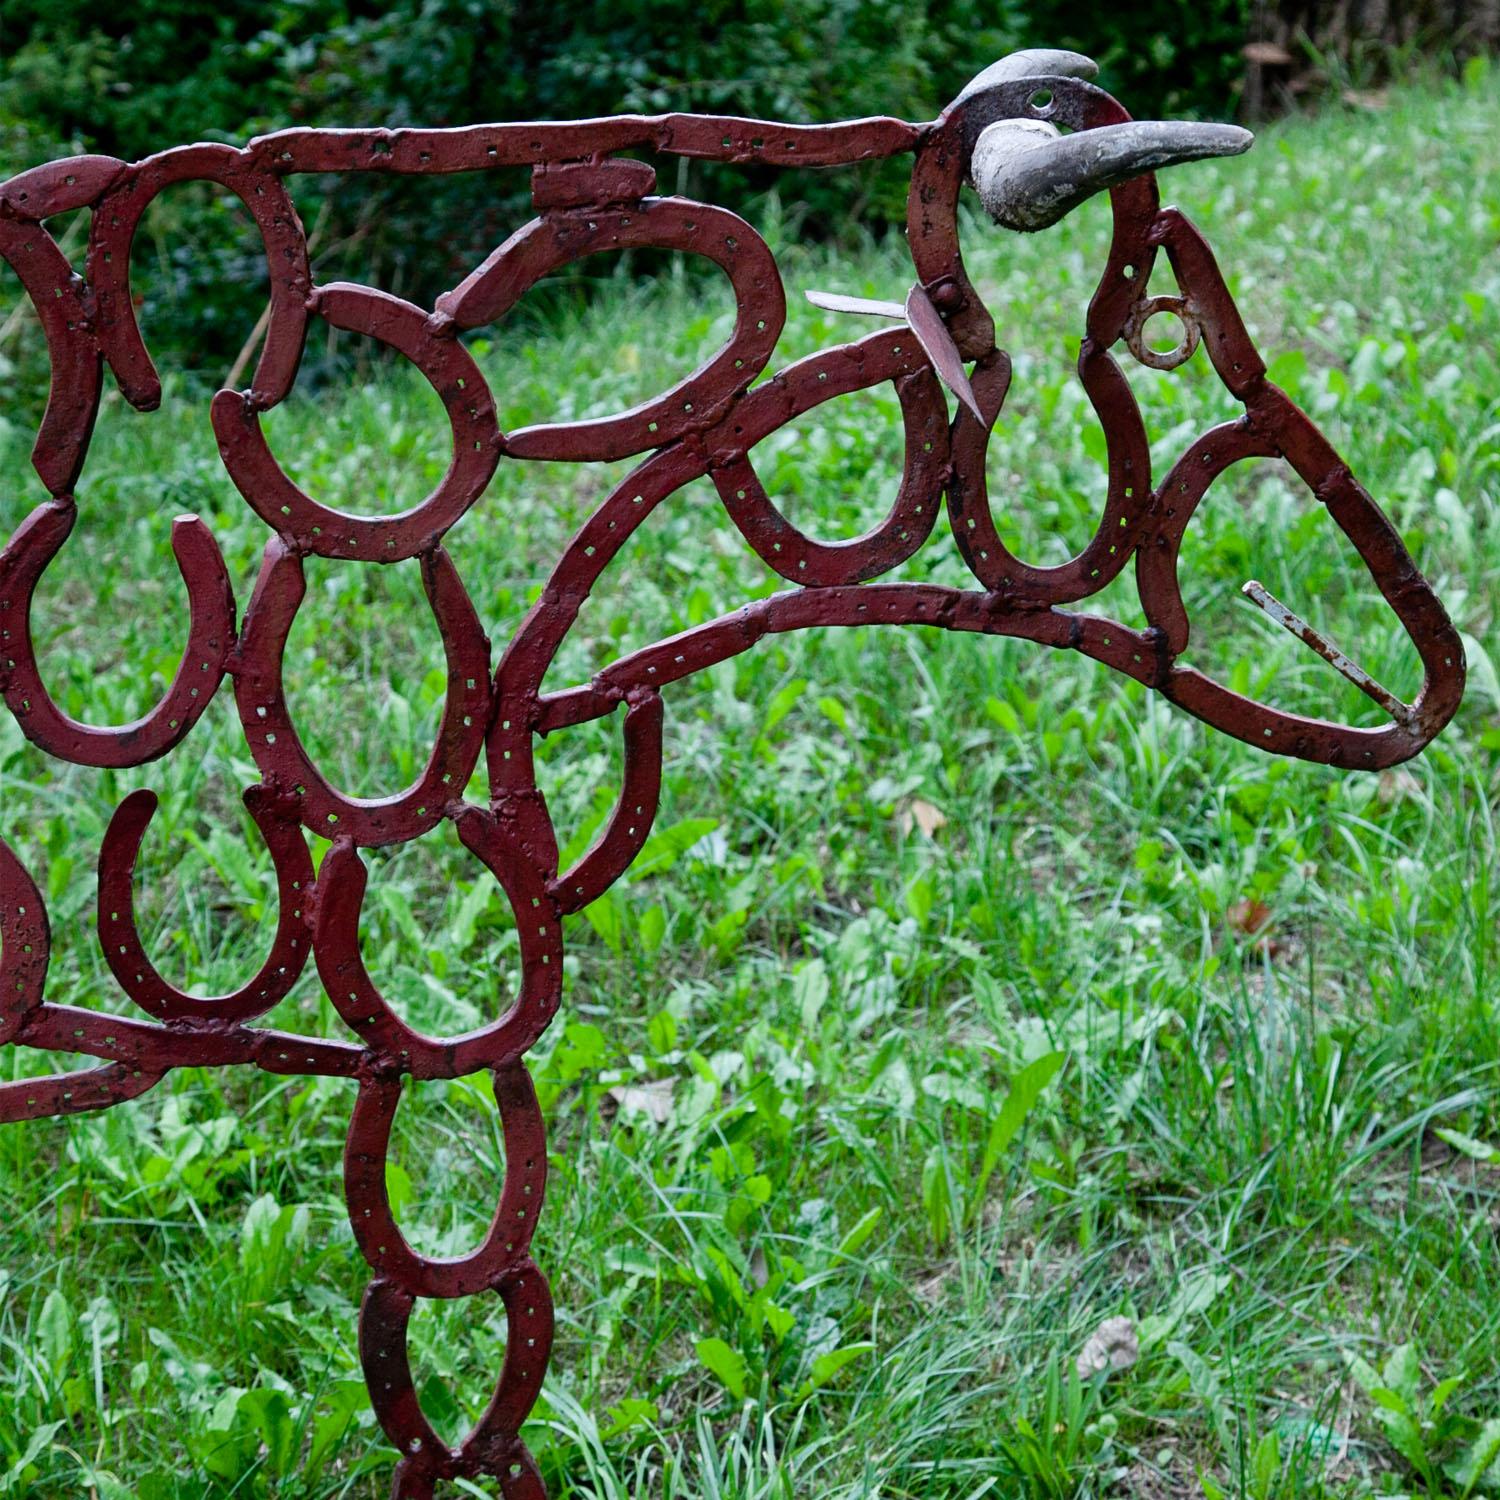 Sculpture of a cow with horns, made of single horseshoes, welded together. The horseshoes are painted red.